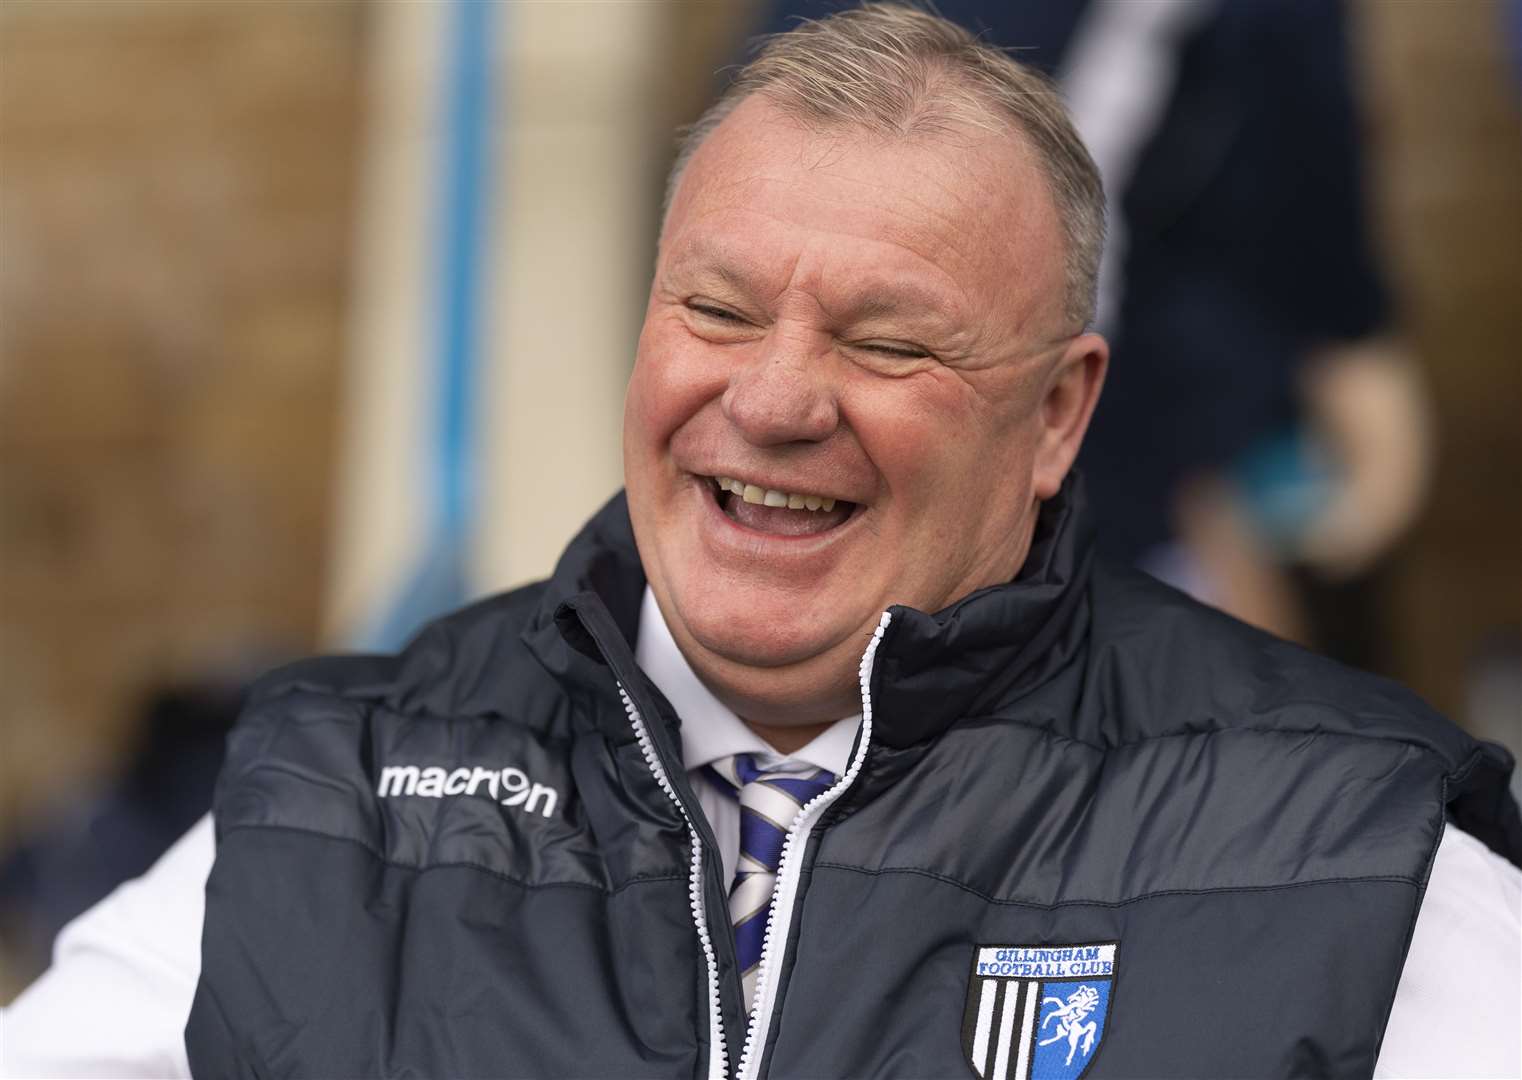 Gillingham boss Steve Evans is all smiles during the second round tie against Doncaster last month. Picture: Ady Kerry